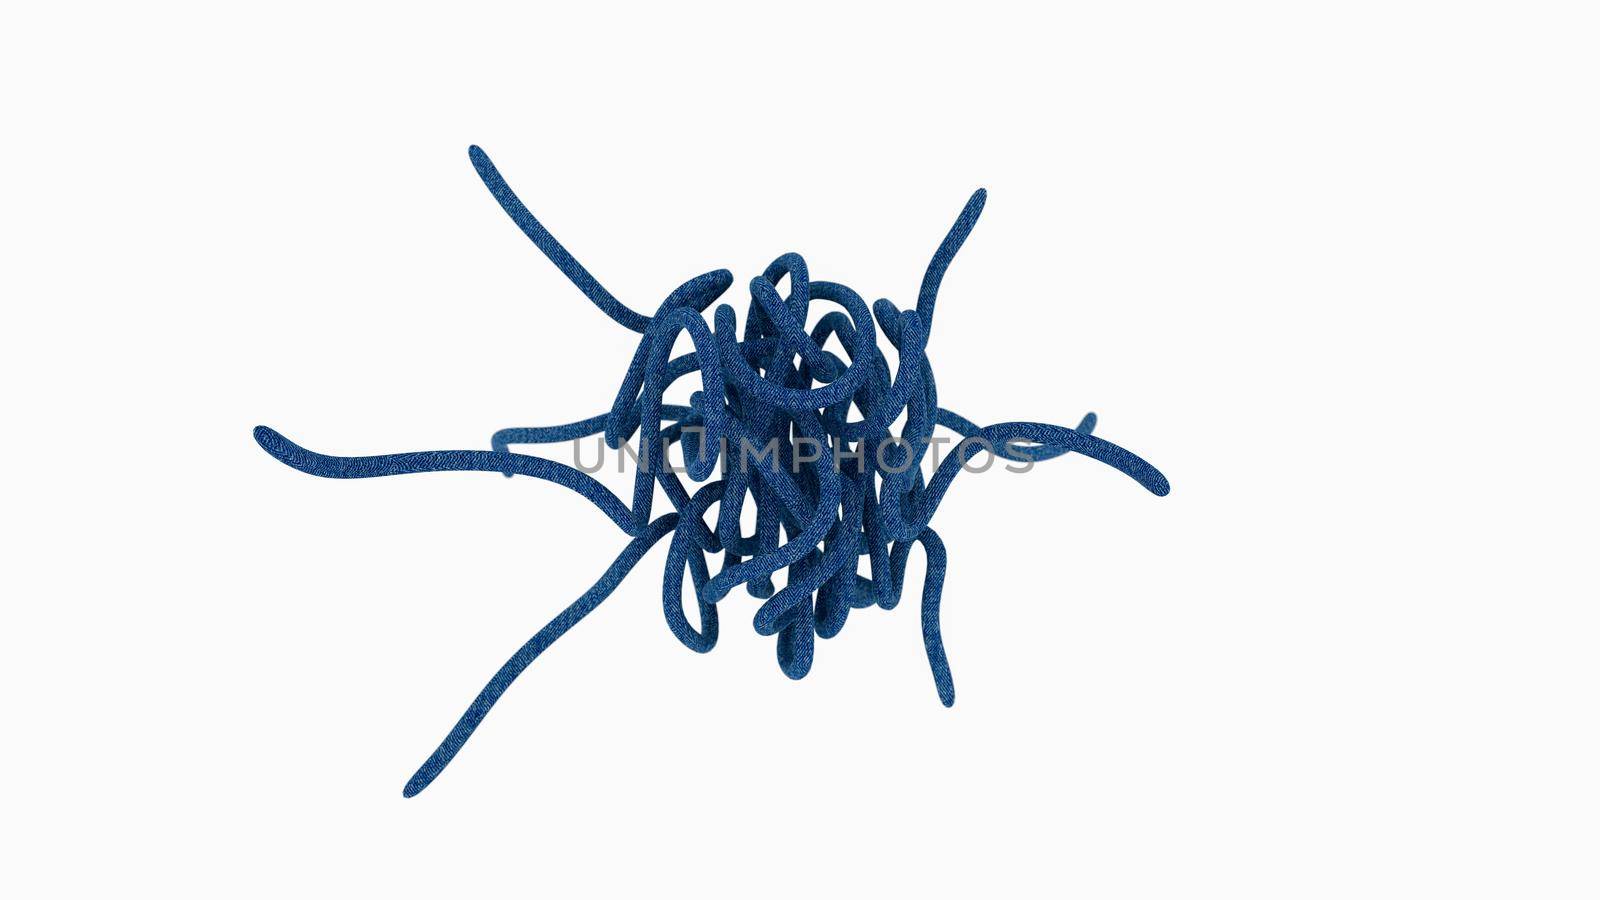 Large rope knot made from blue denim laces. 3D rendering illustration by clusterx